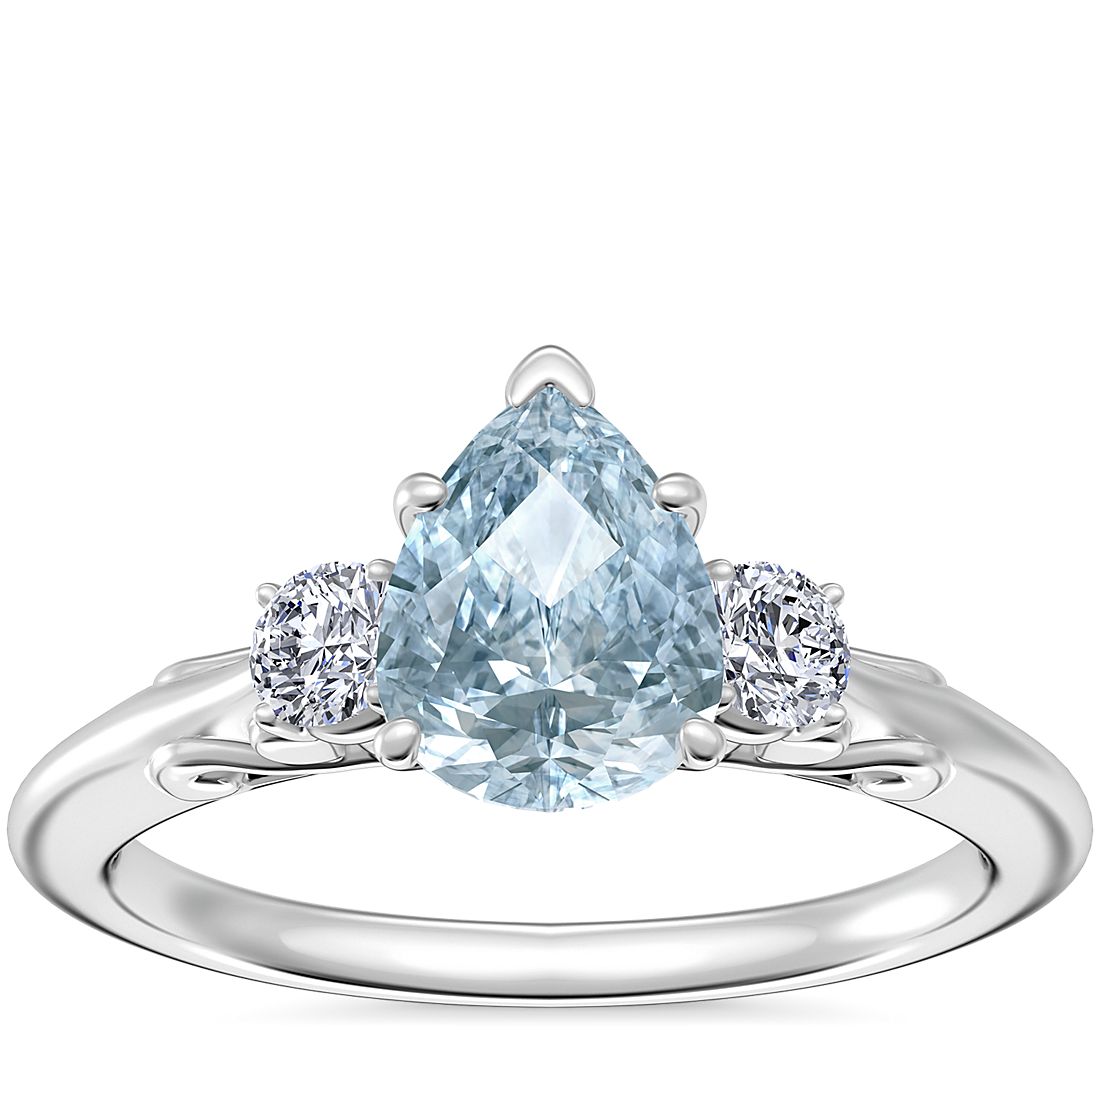 Vintage Three Stone Engagement Ring with Pear-Shaped Aquamarine in Platinum (8x6mm)